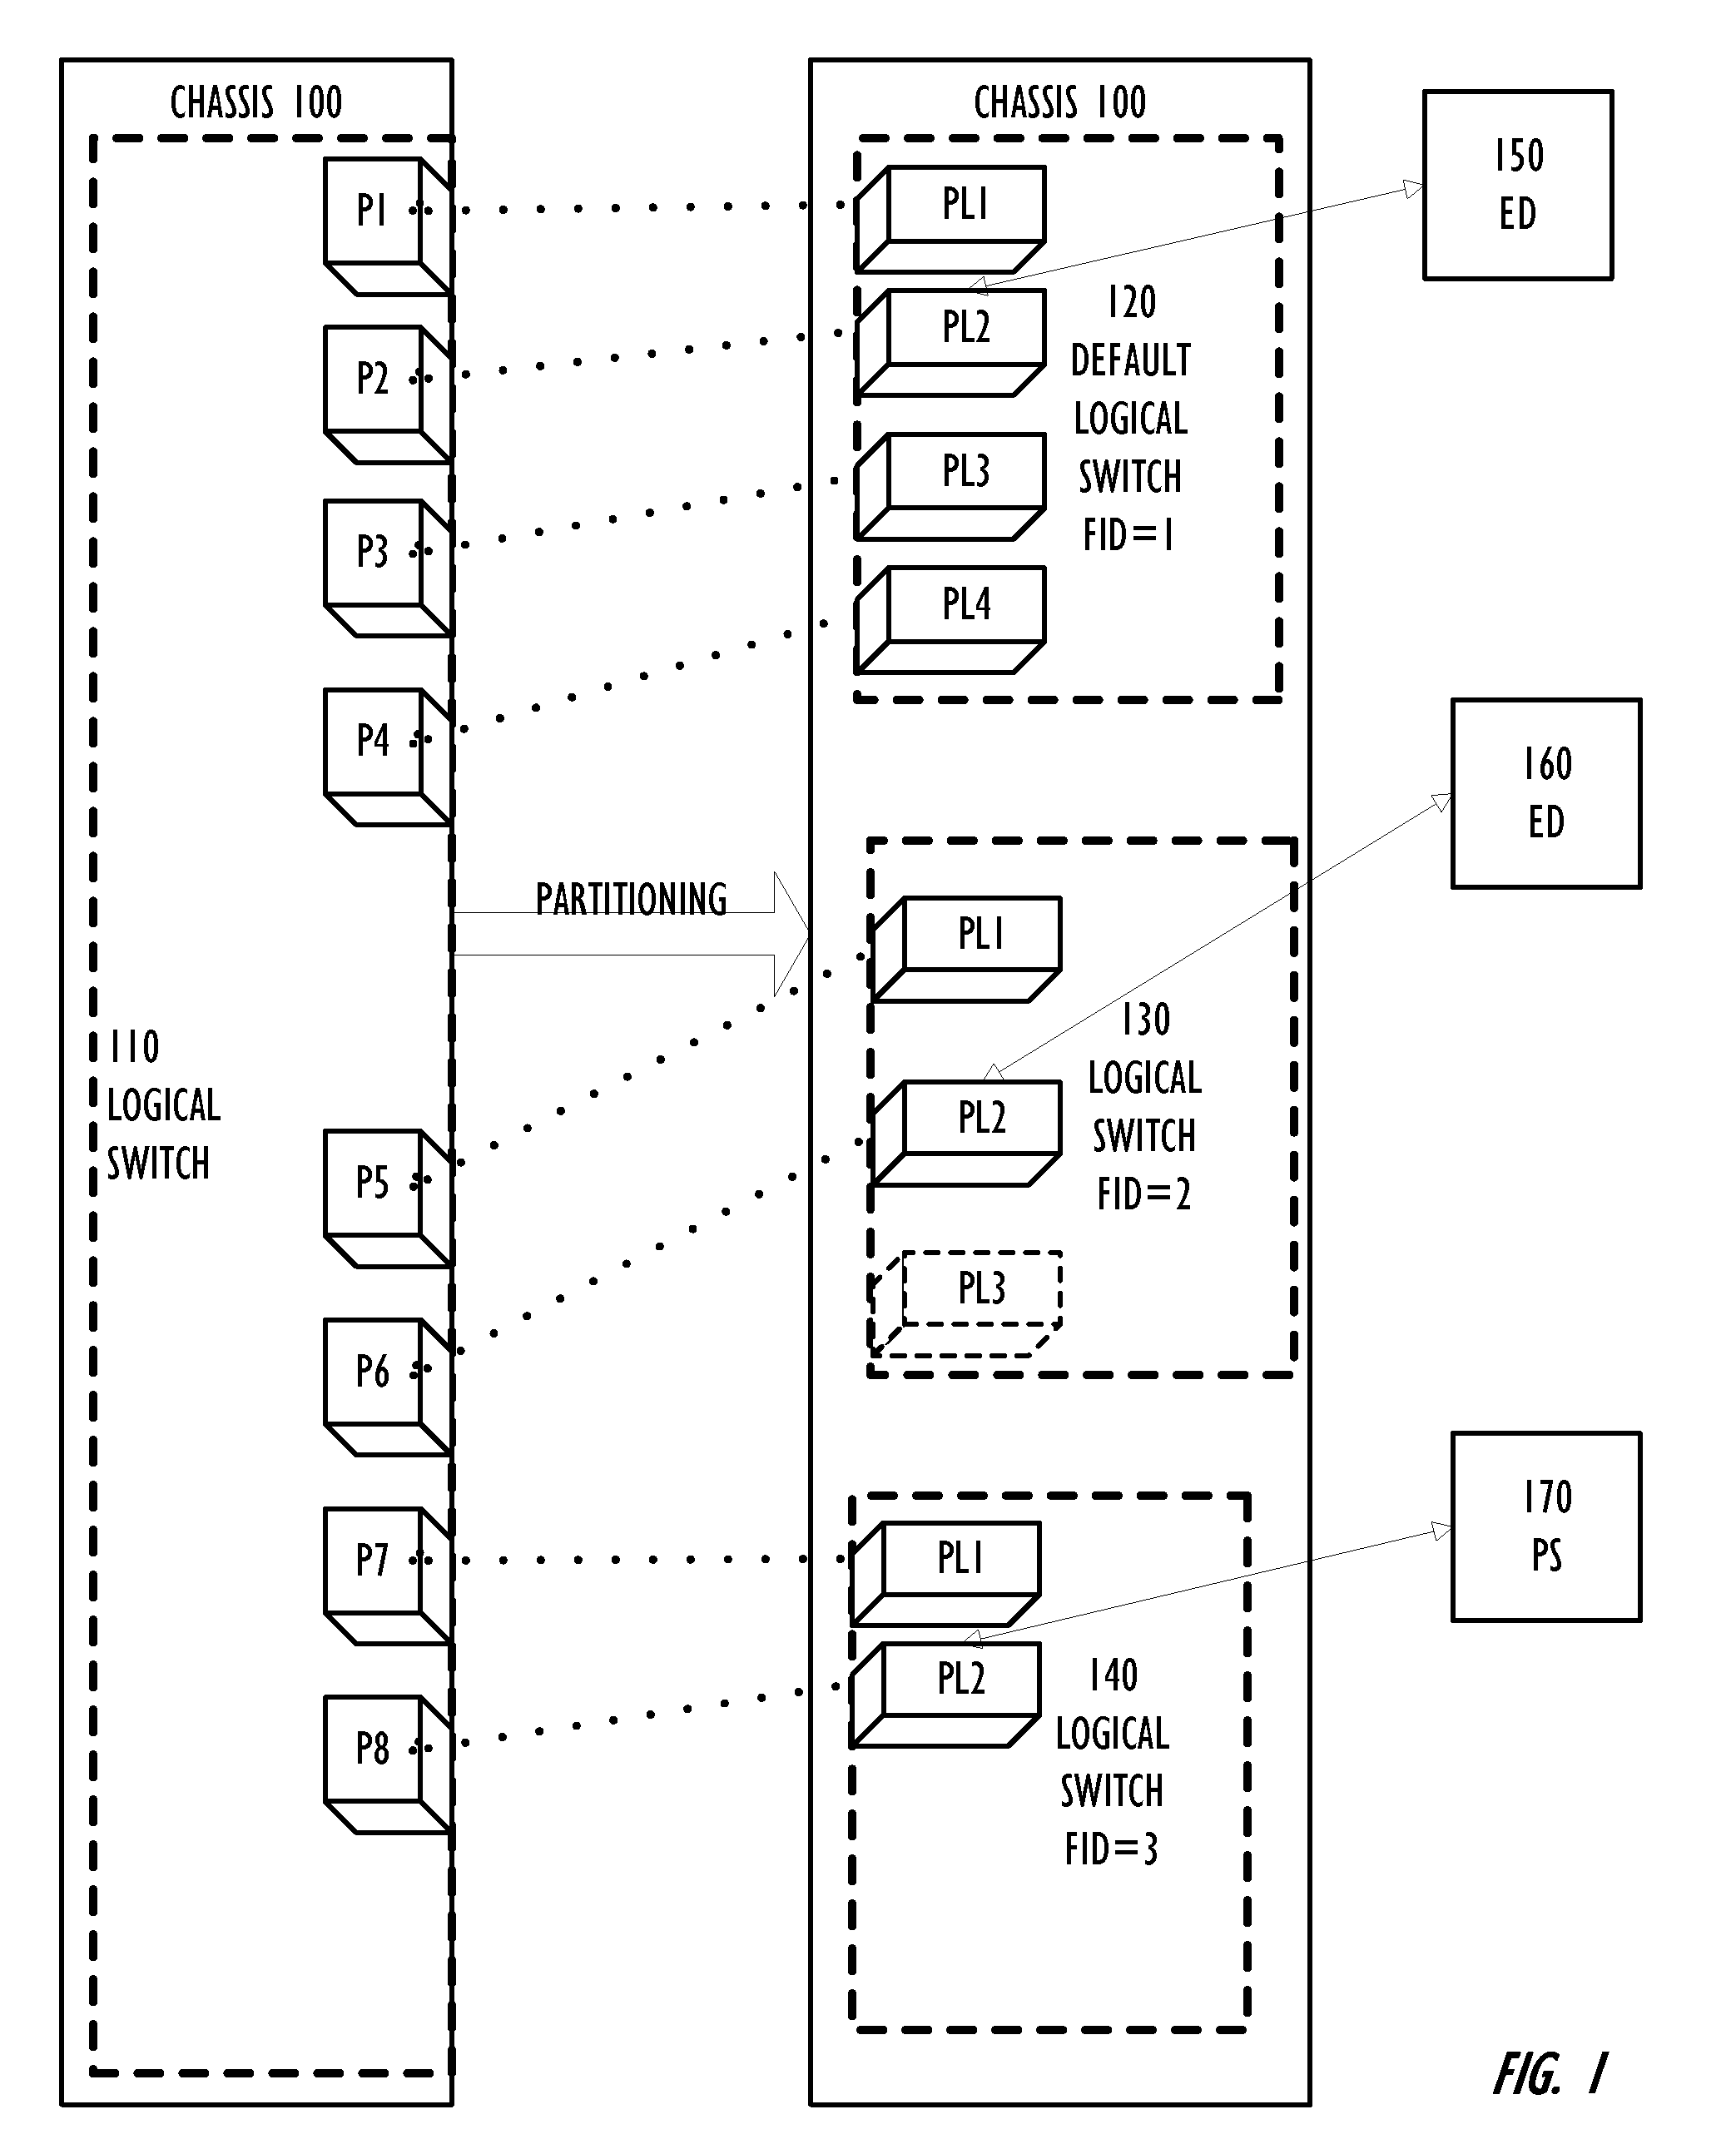 Transit Switches in a Network of Logical Switches